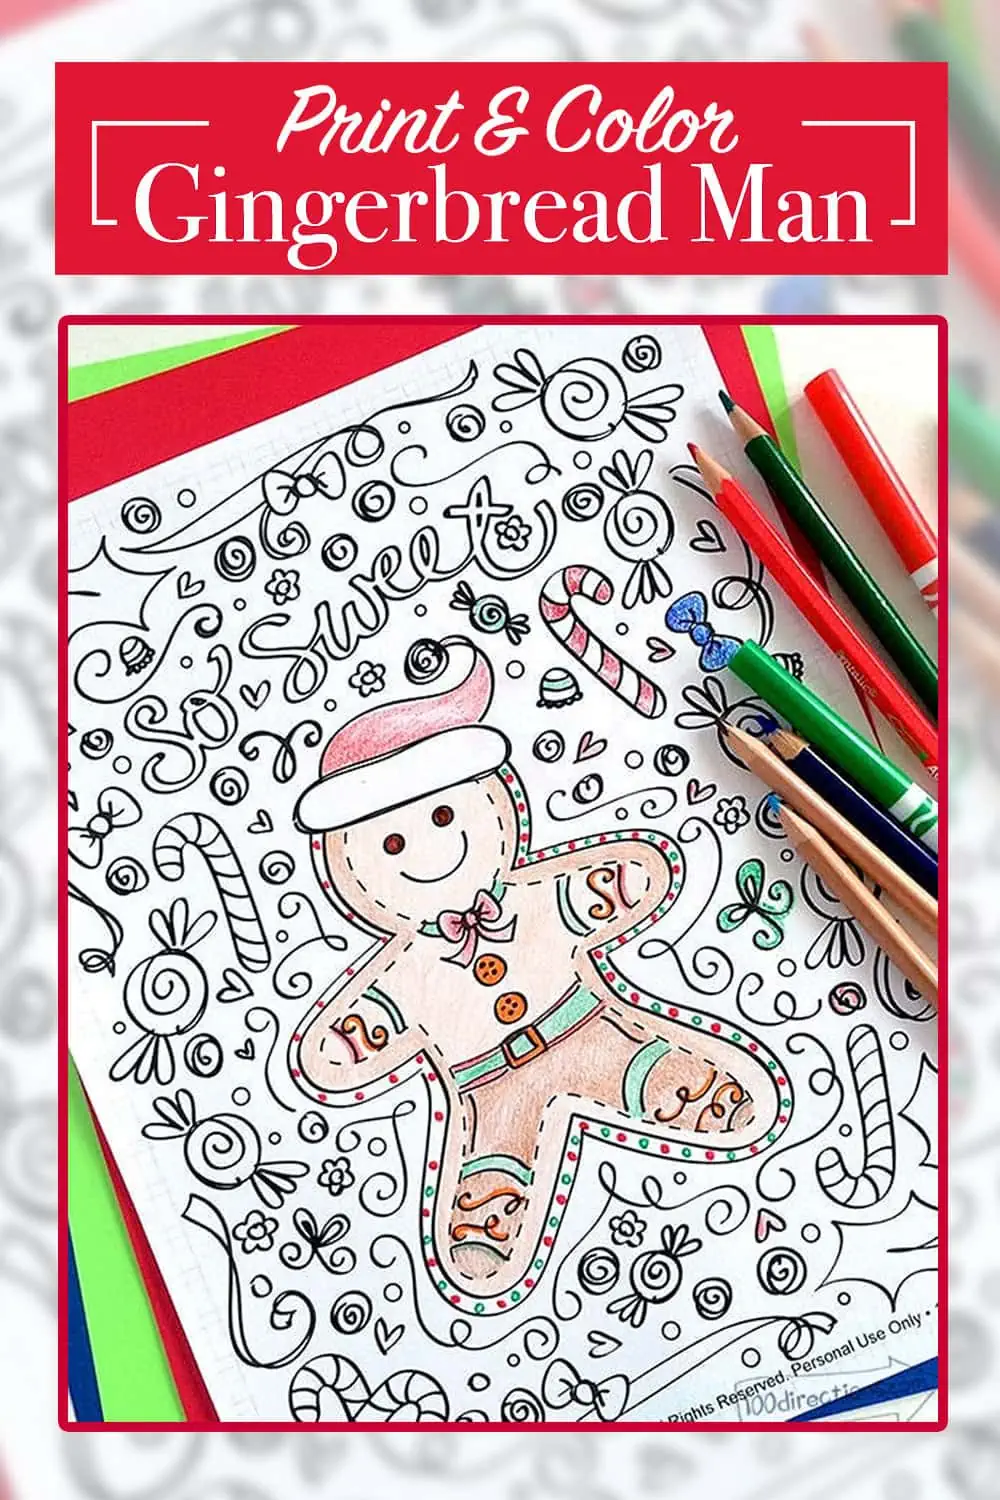 Gingerbread man coloring page to print and color - designed by Jen Goode